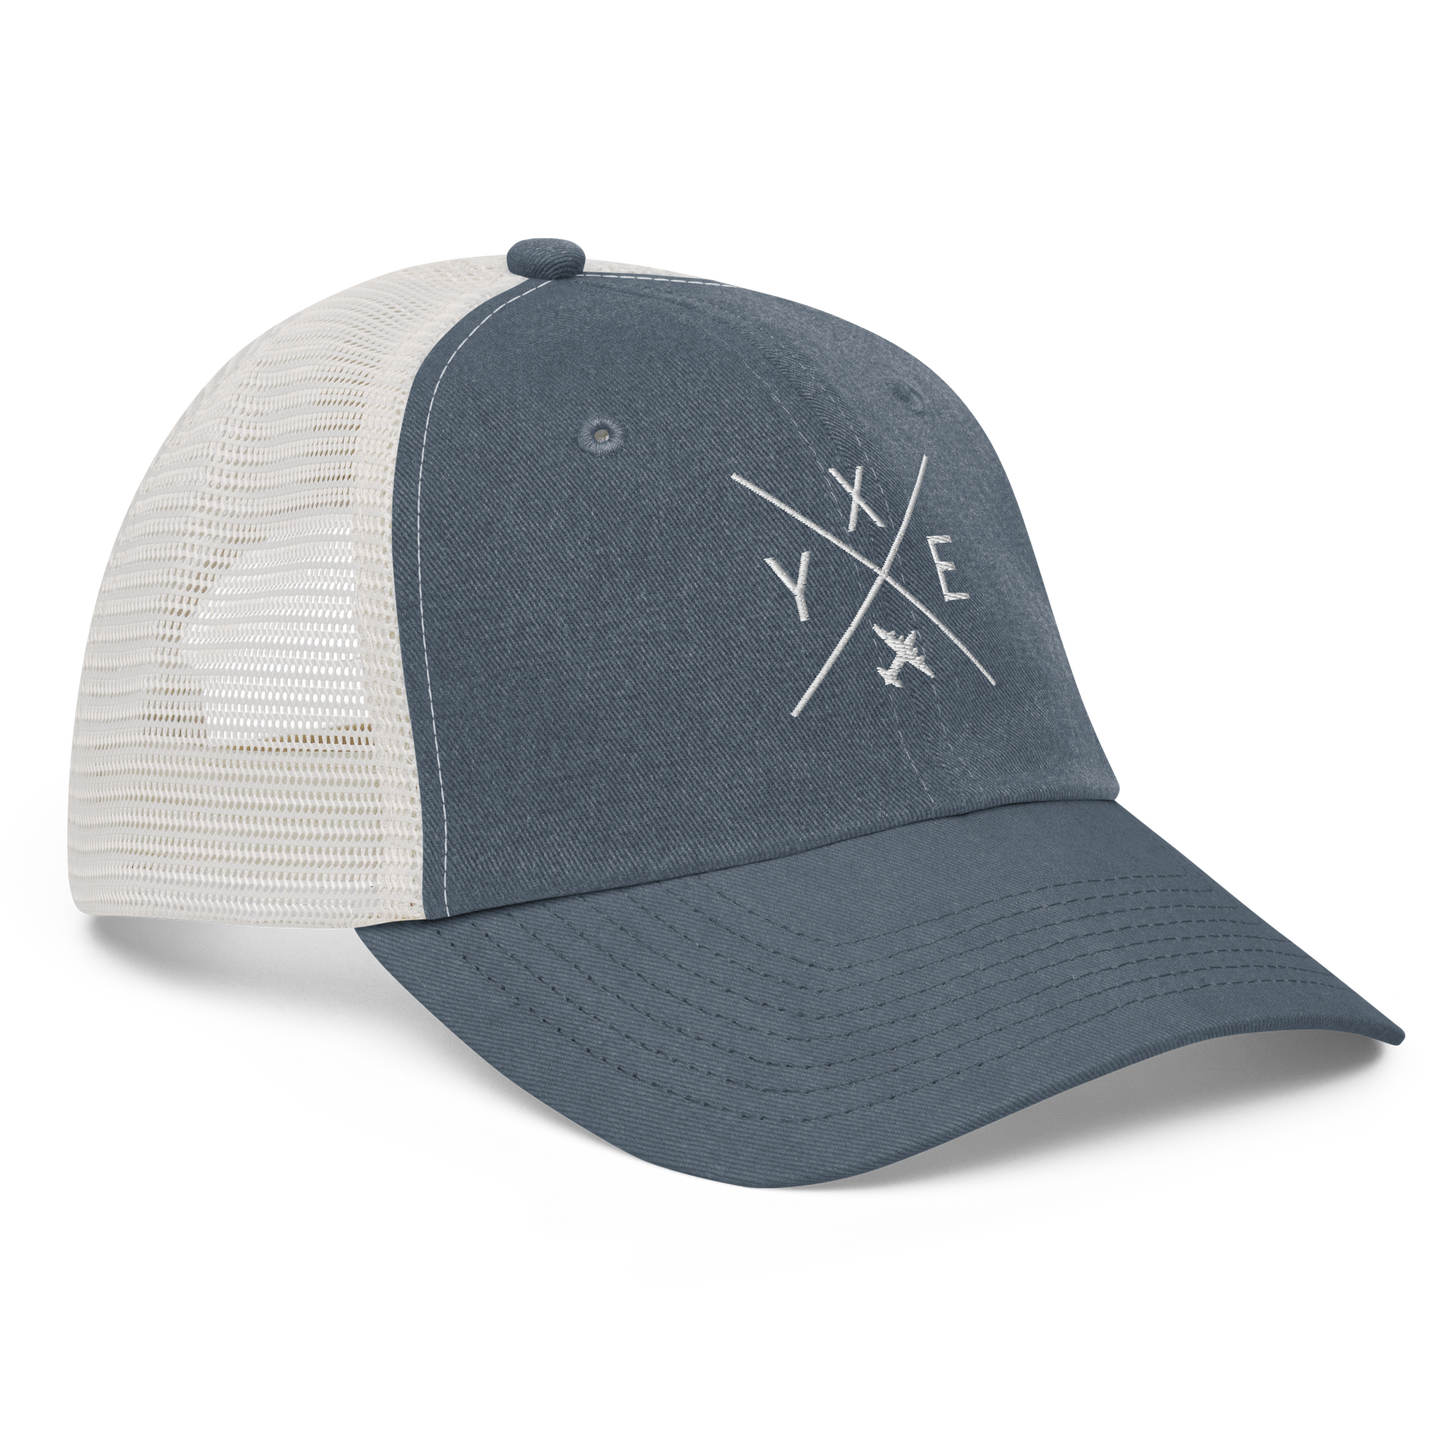 YHM Designs - YXE Saskatoon Pigment-Dyed Trucker Cap - Crossed-X Design with Airport Code and Vintage Propliner - White Embroidery - Image 07